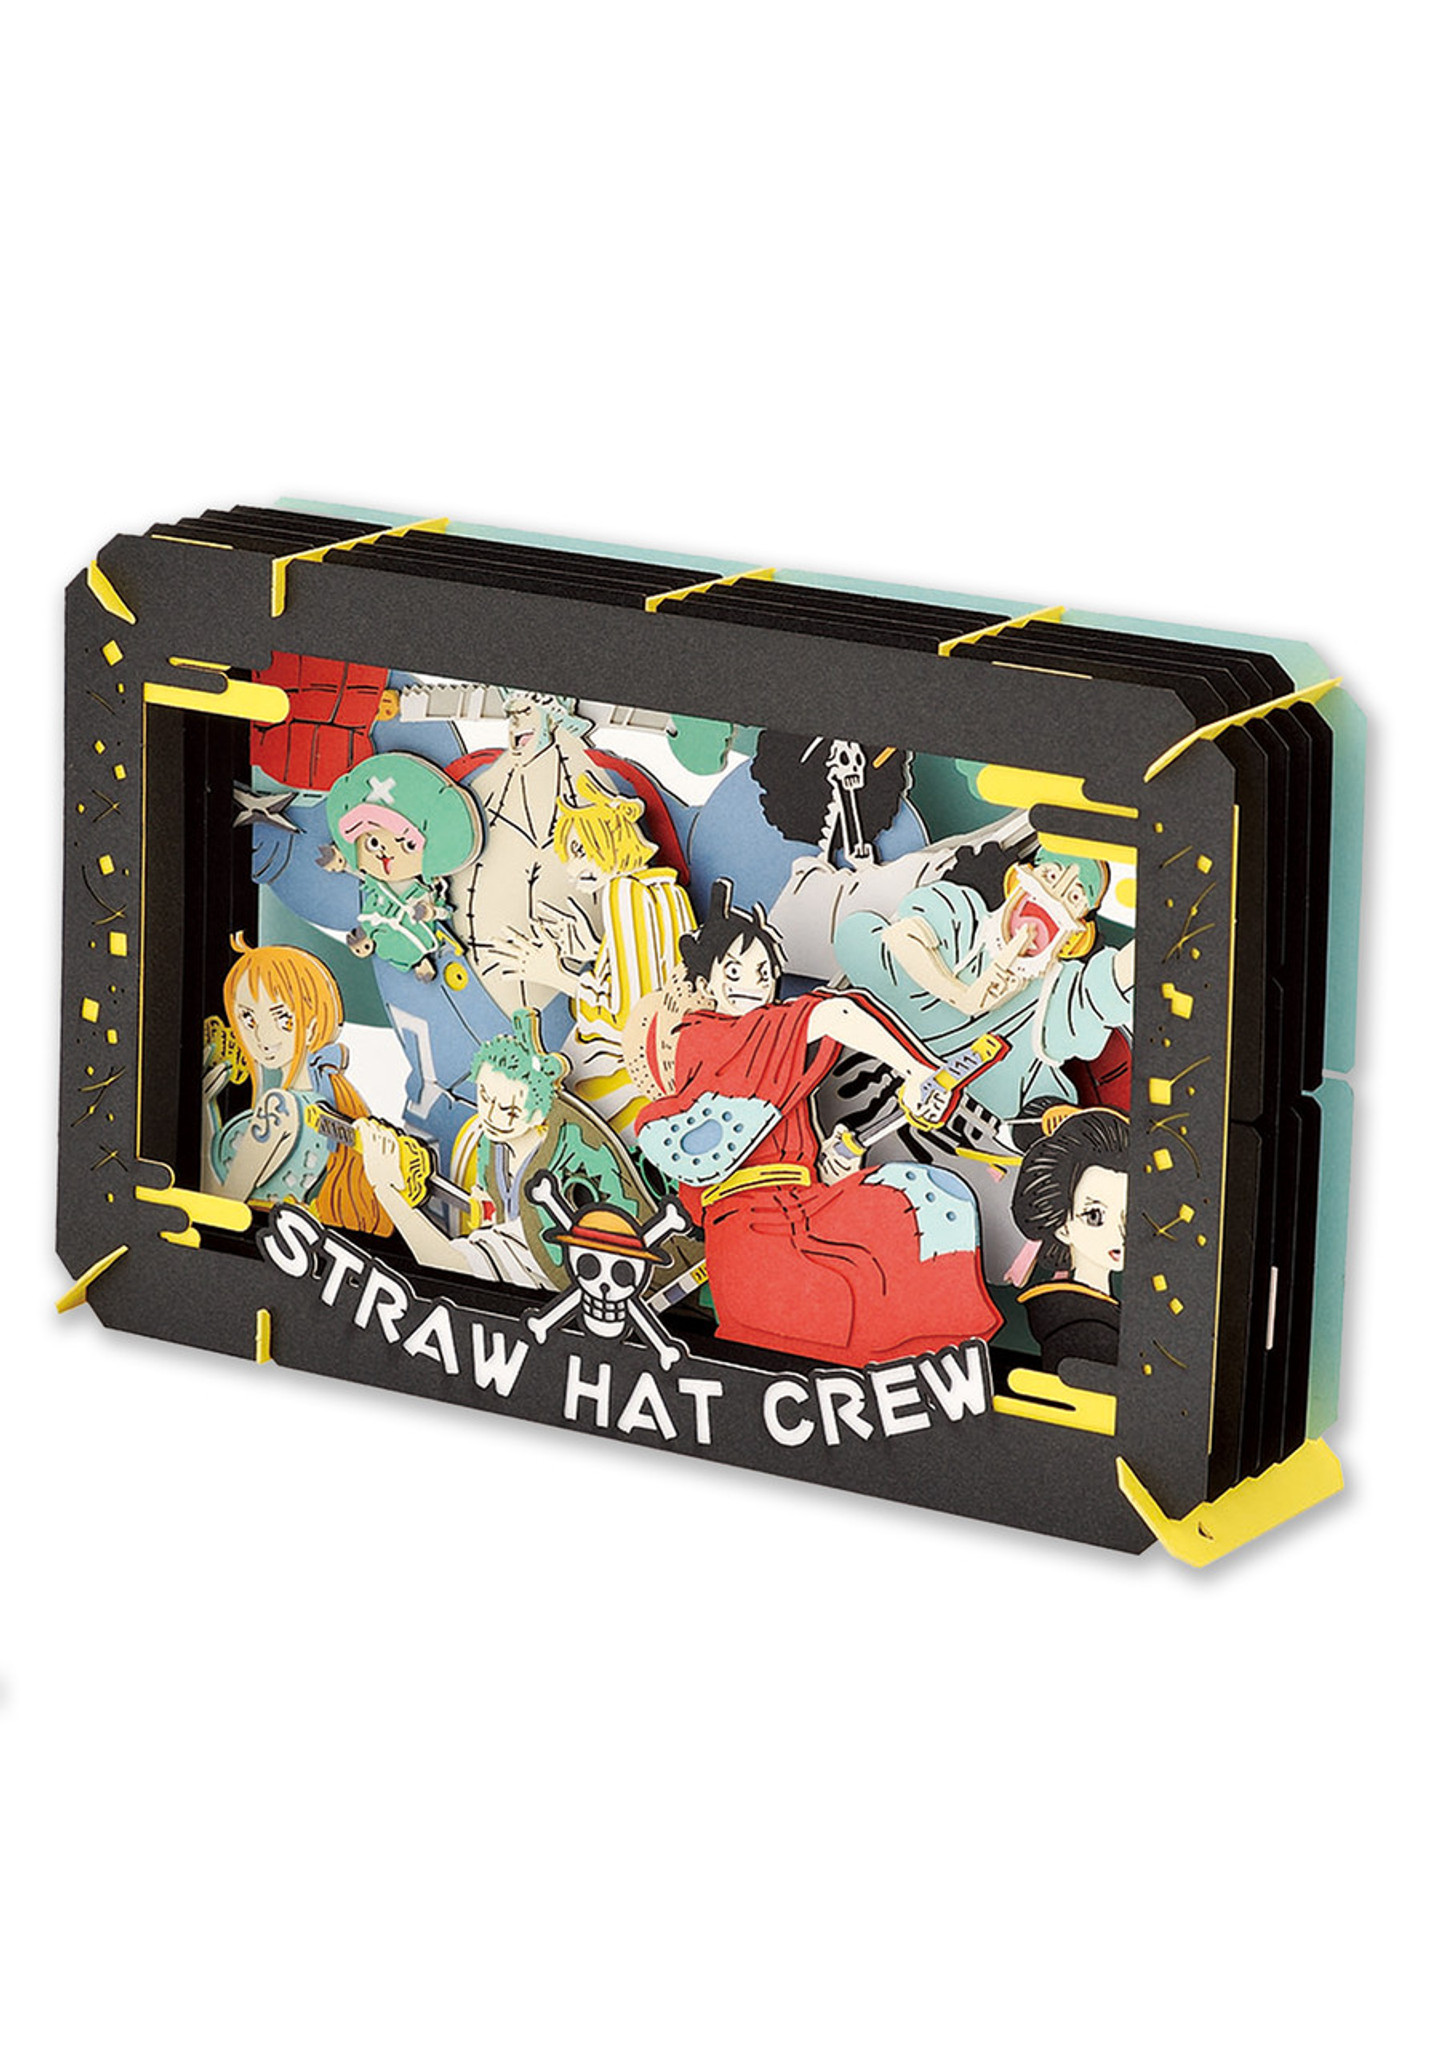 ONE PIECE: Paper Theater "Straw Hat Crew" Puzzle